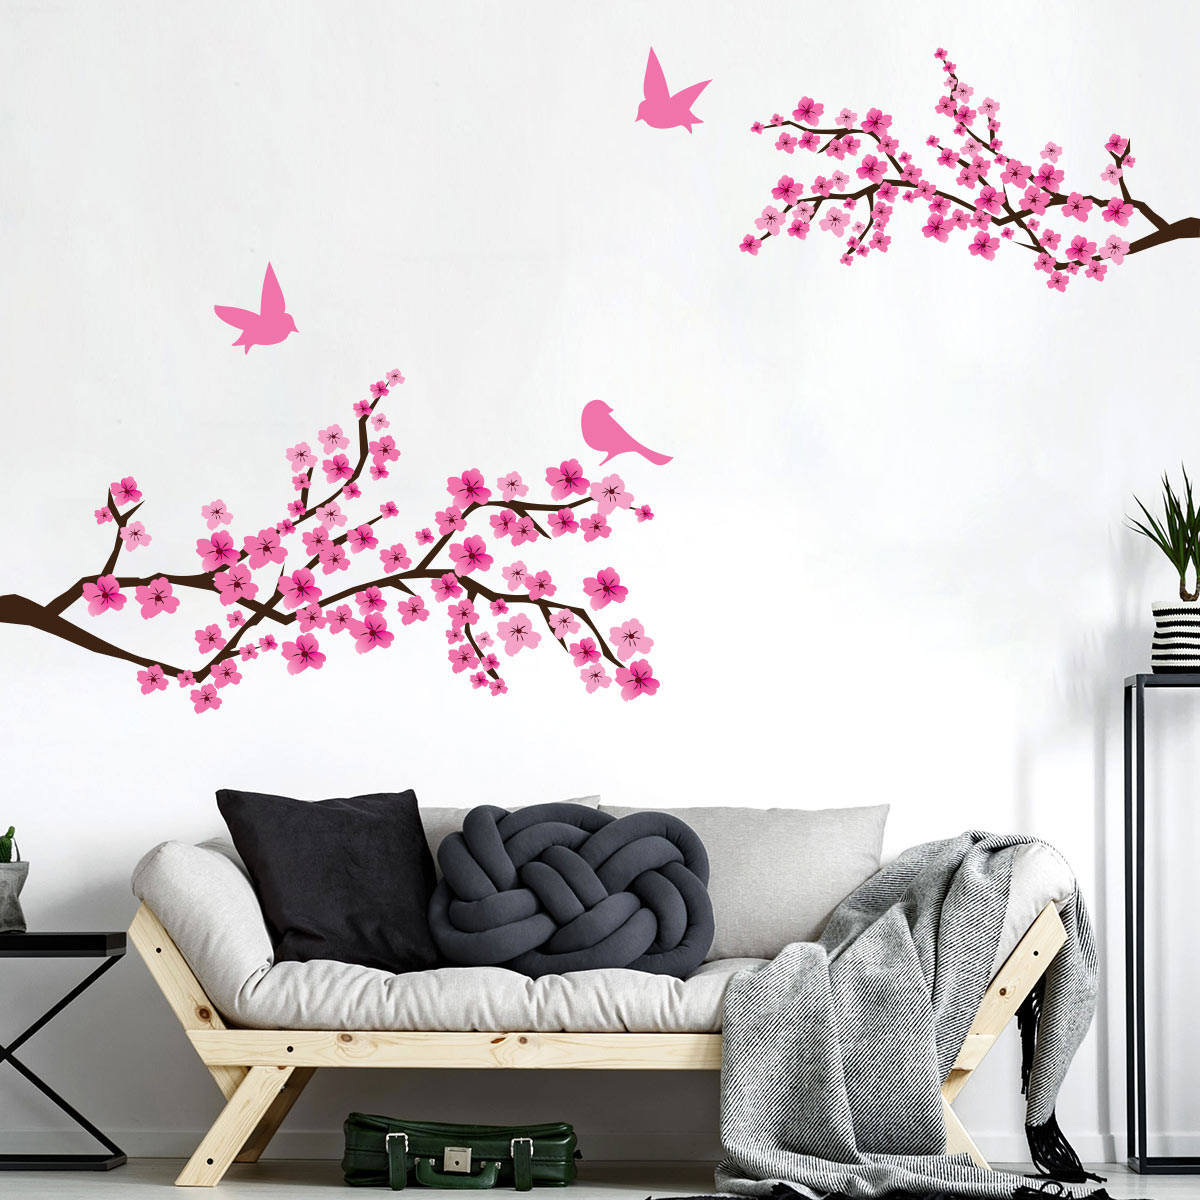 Wall decal 2 branches of Japanese cherry tree and 3 birds